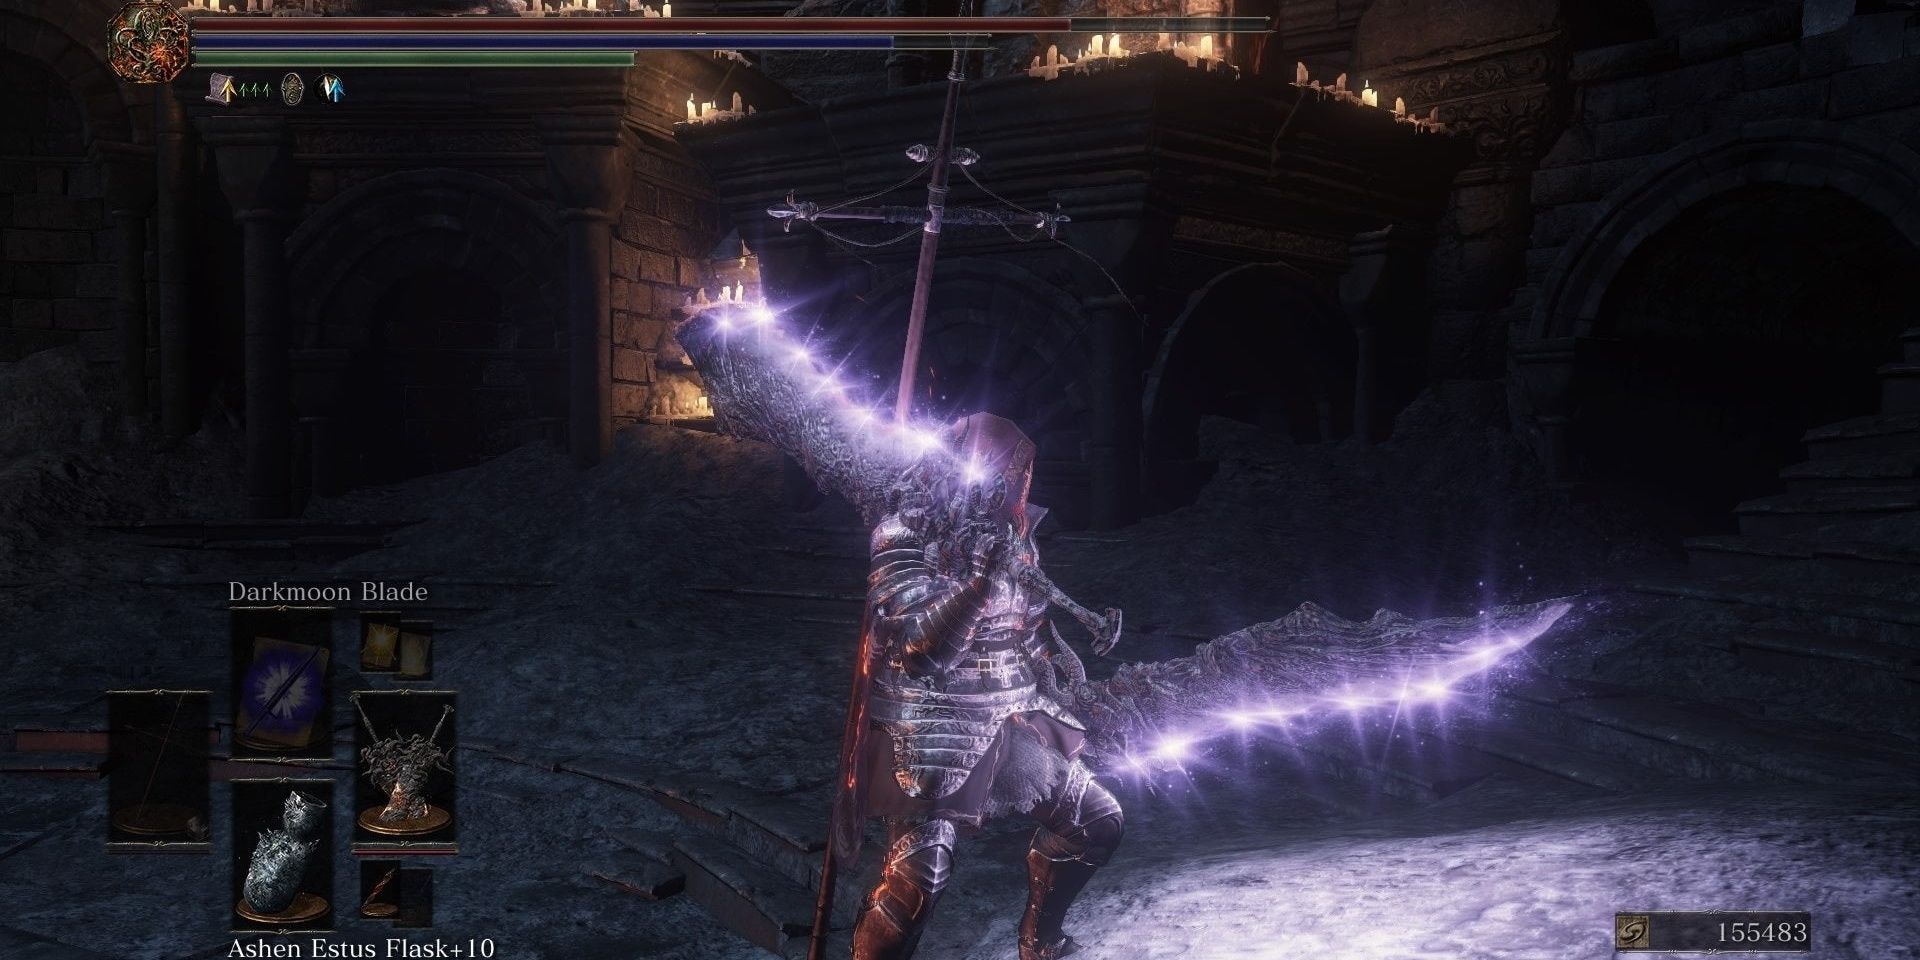 https://www.reddit.com/r/darksouls3/comments/65380f/buff_any_weapon_with_darkmoon_blade_you_dont_even/